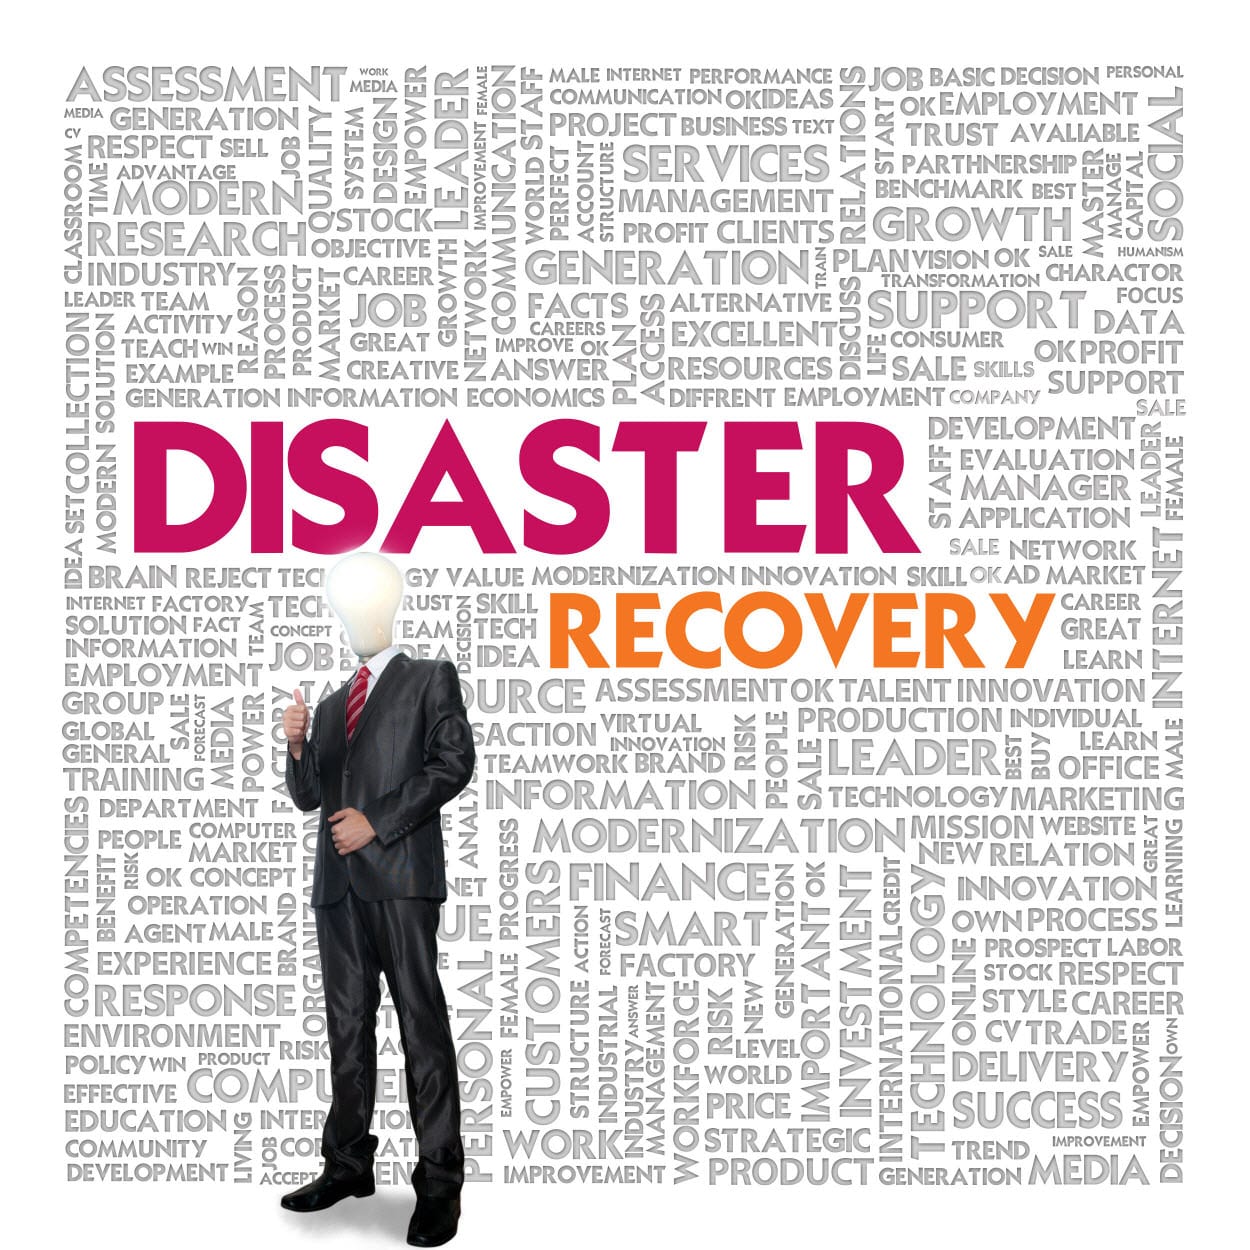 What are some different disaster recovery plans?